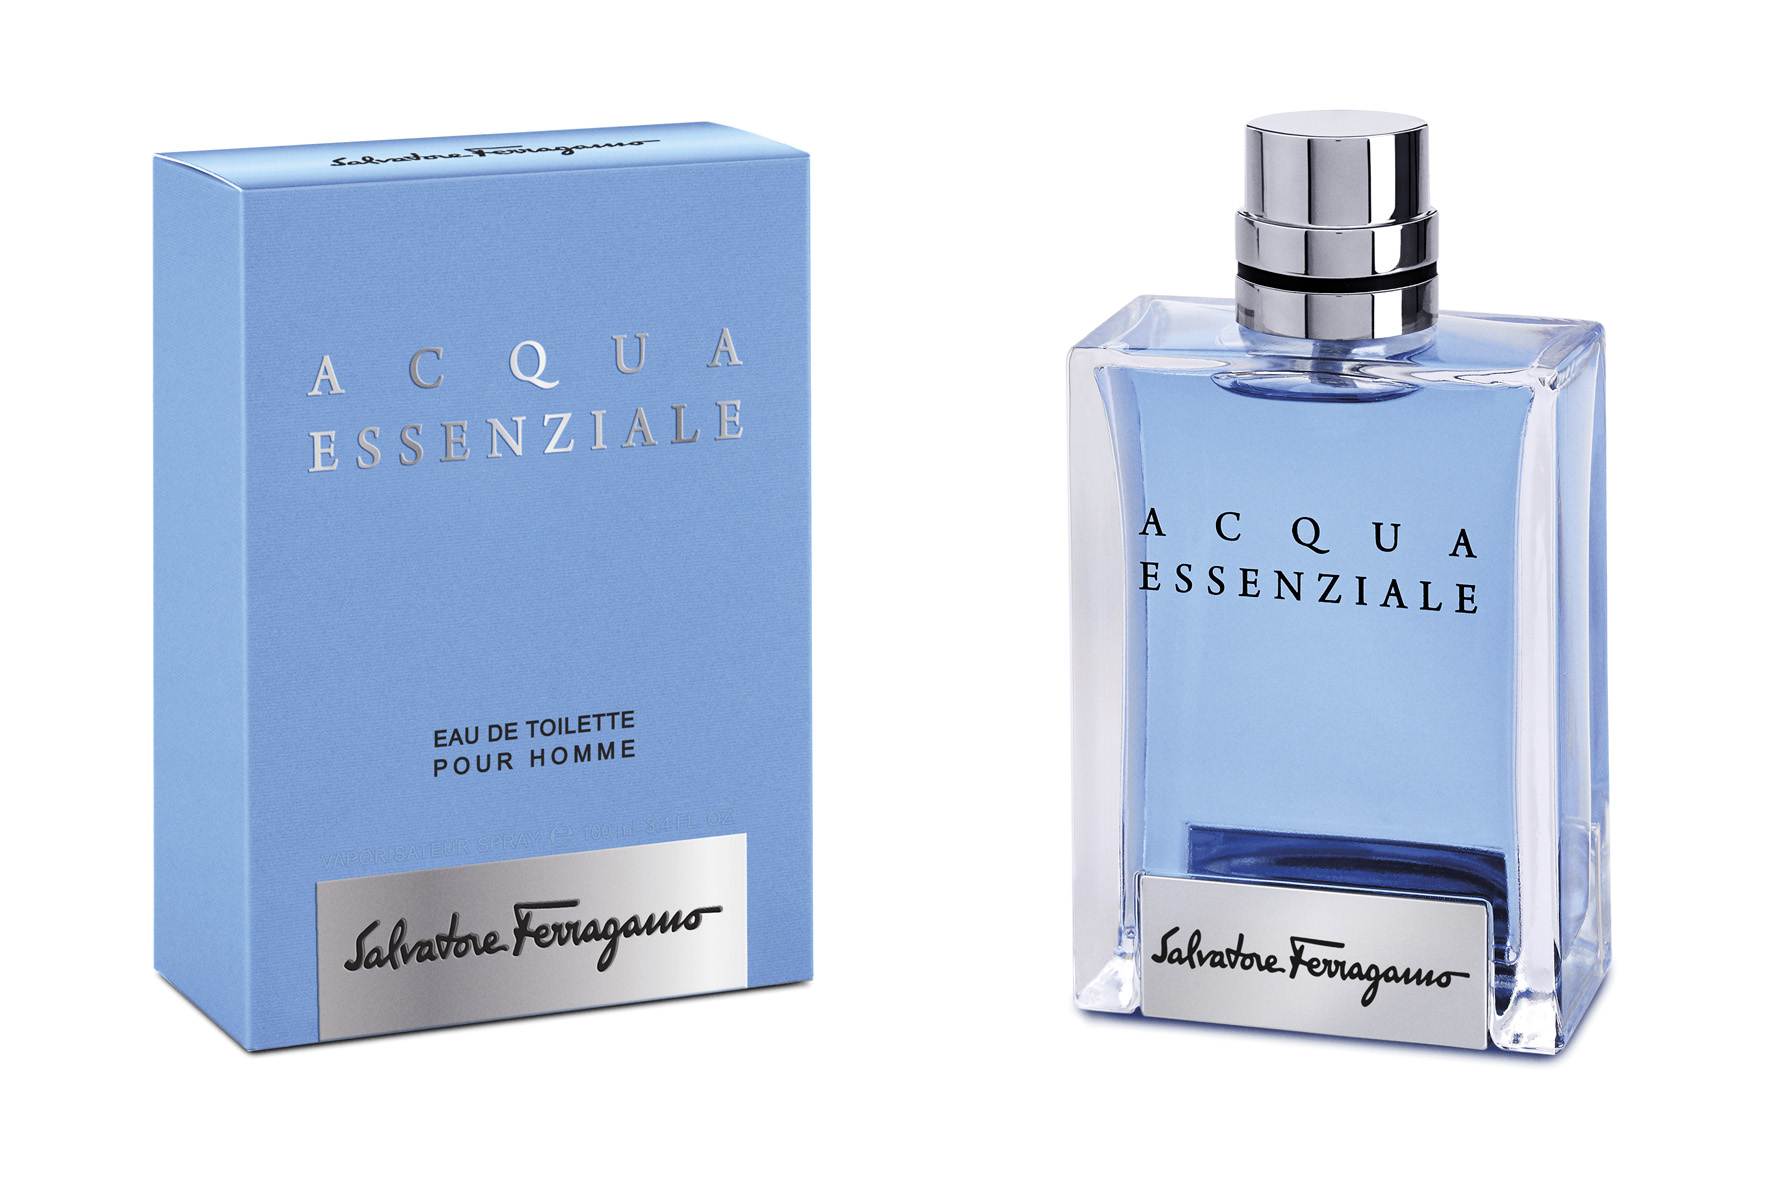 Salvatore Ferragamo Acqua Essenziale Cologne Fragrance Body Wash Shampoo Deodorant aftershave balm macys where to buy purchase price launch release retail ingredients notes color gift father's day